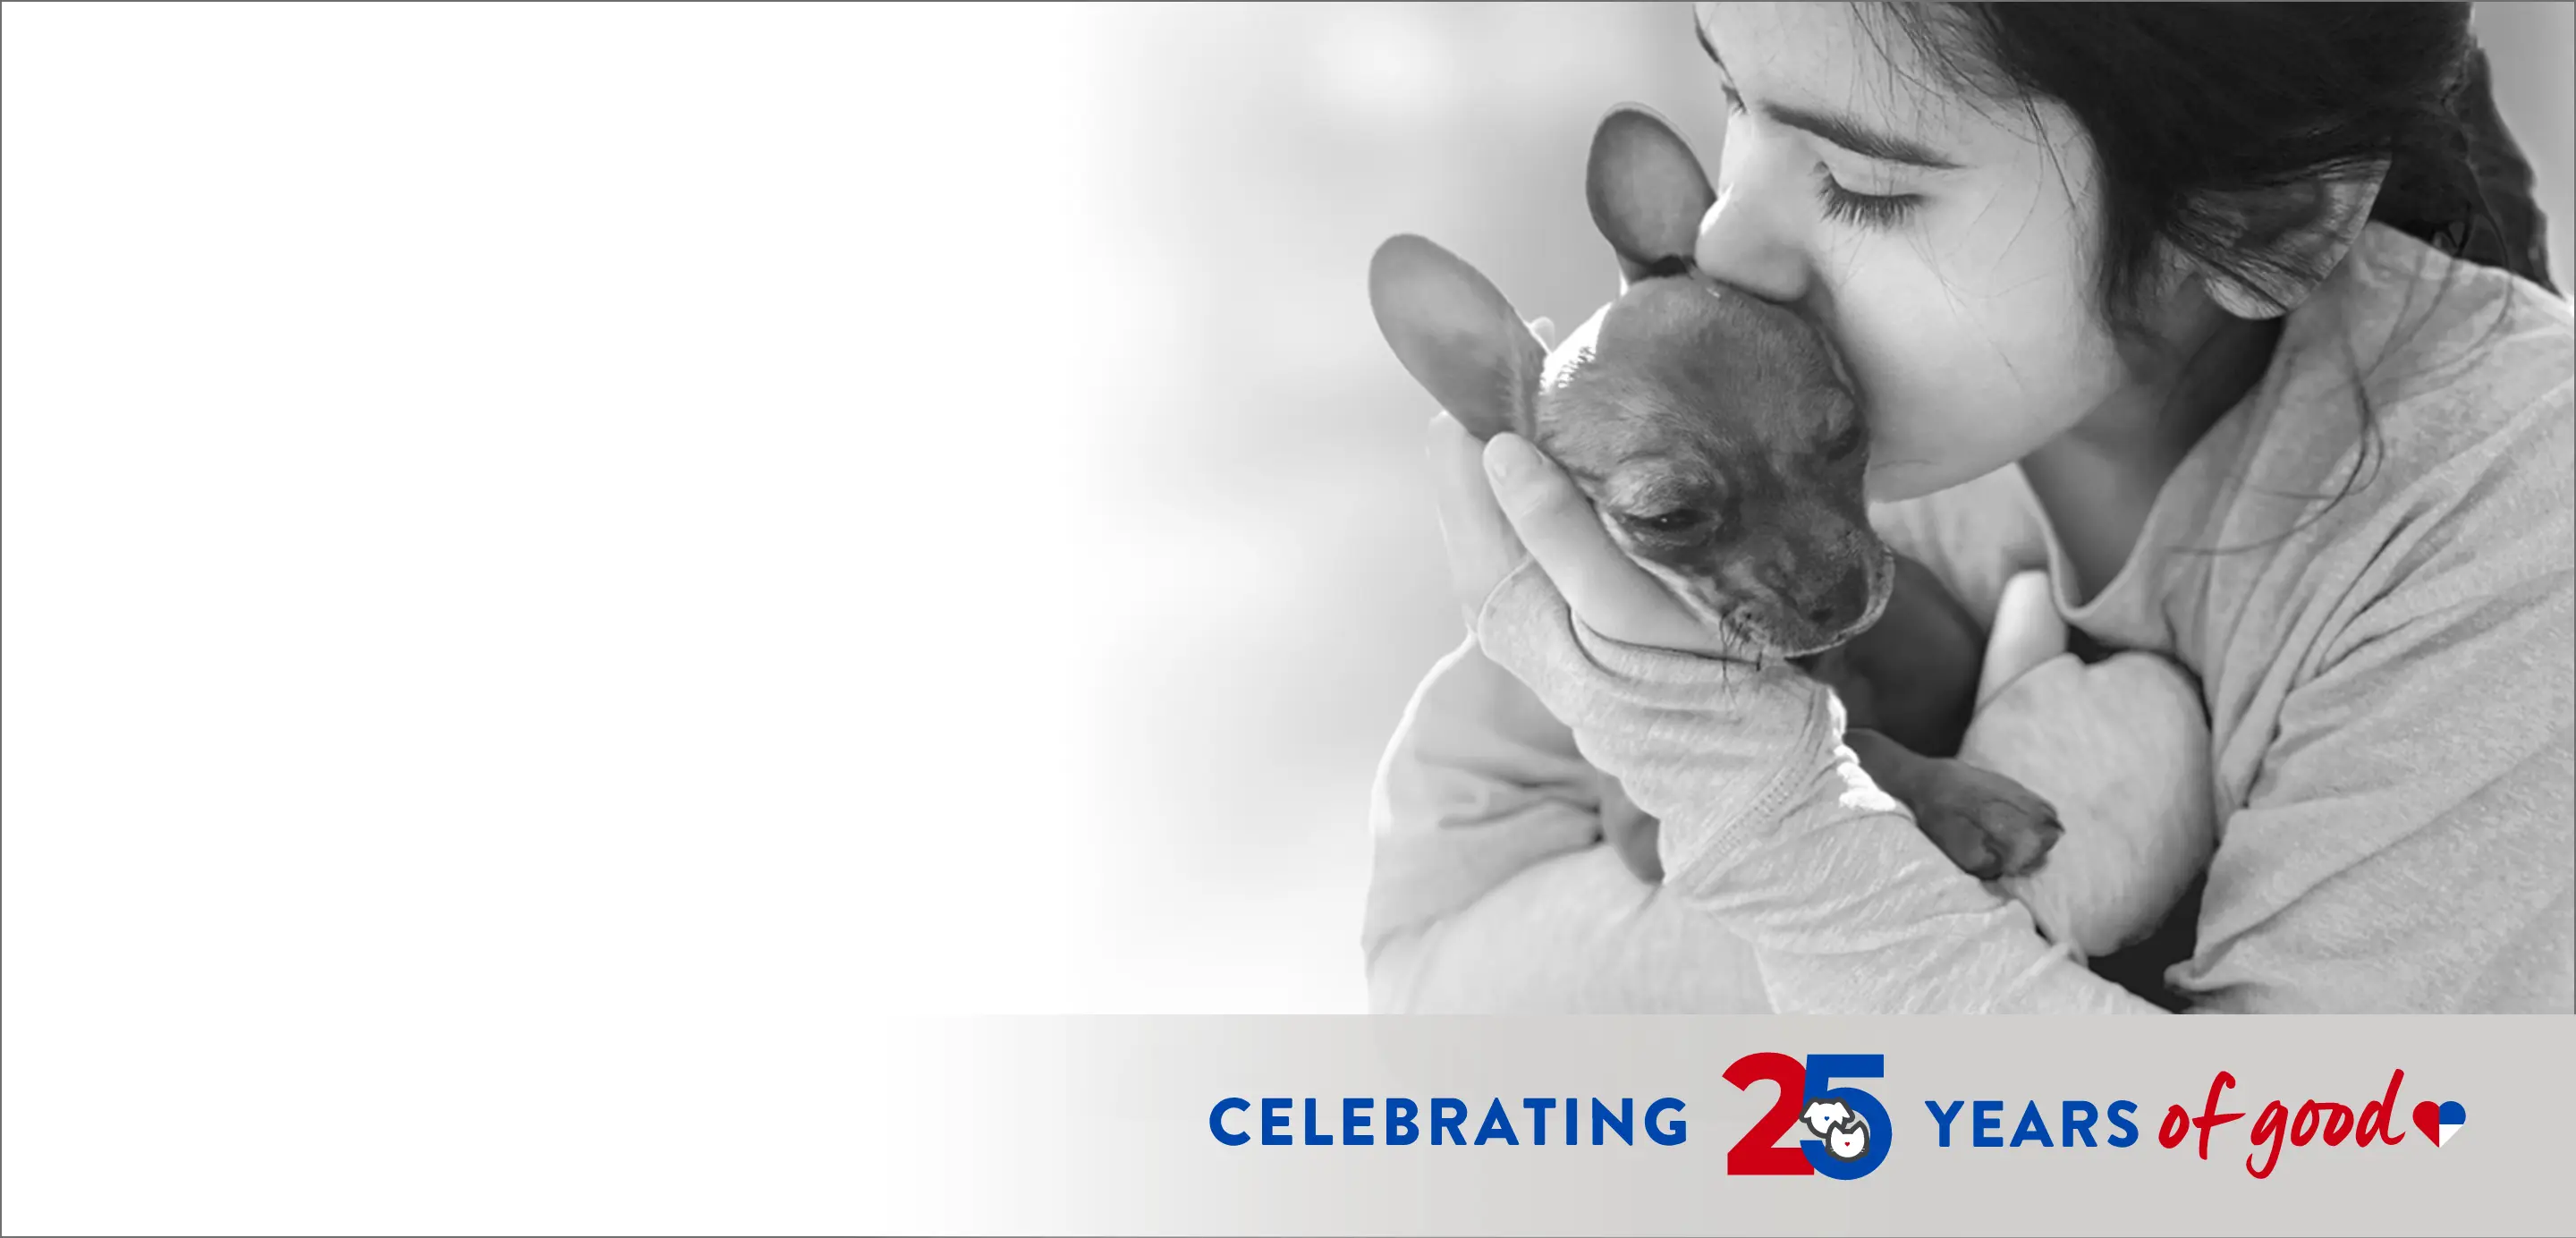 young girl kisses a chihuahua on the side of the head, text that reads "Celebrating 25 Years of Good"